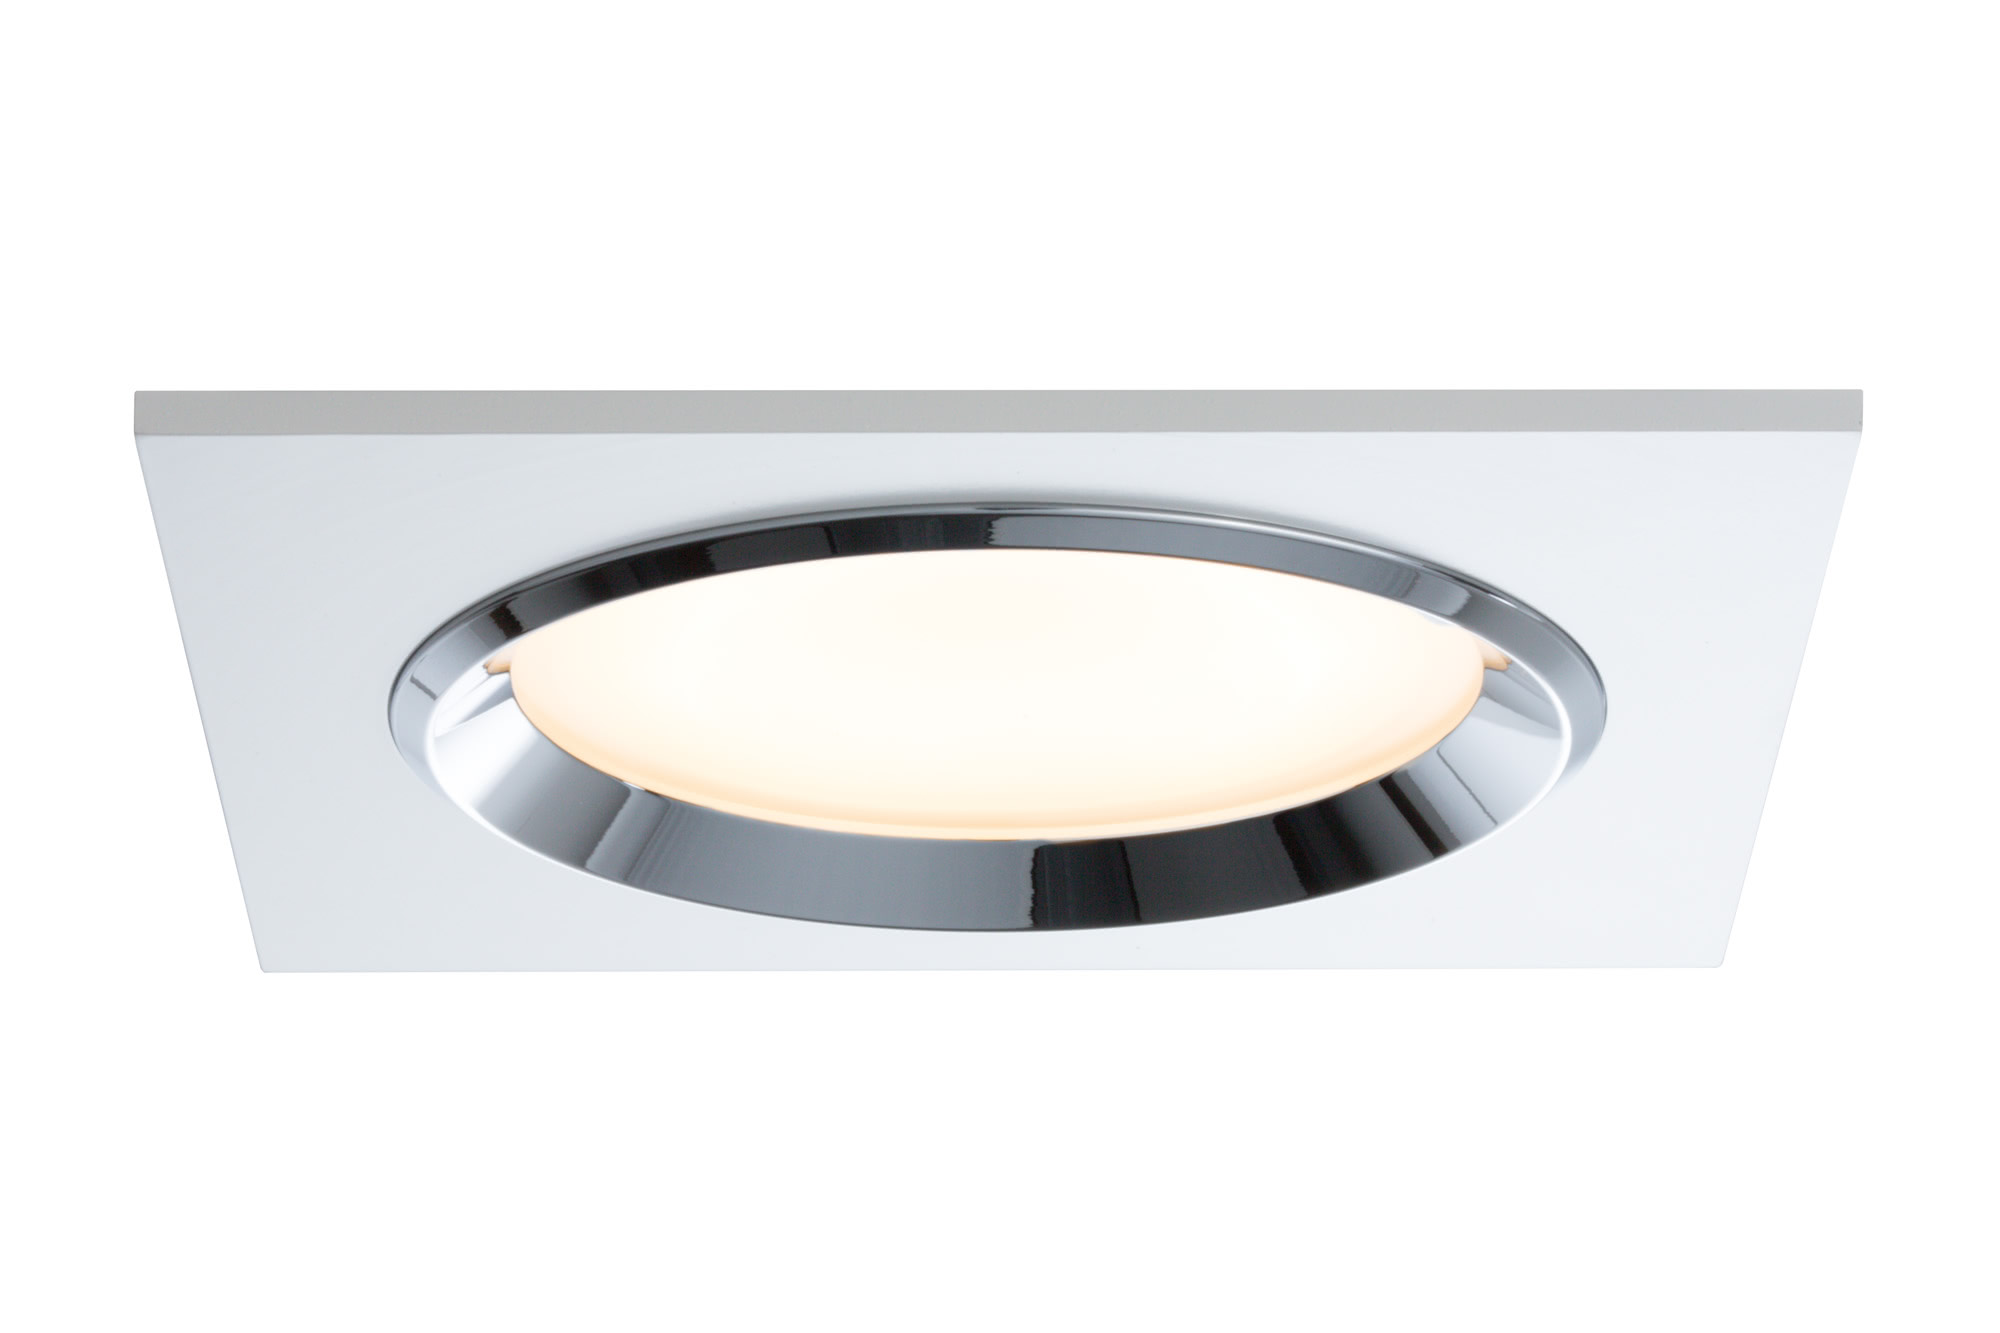 92695 Prem. EBL Set Dice eckig LED 3x8W Ws Elegant material вЂ“ high-quality finish. The LED recessed luminaires in the Premium Line offer efficient but homelike warm white LED light and meet the most stringent standards for material quality and design. The recessed lamp means that the light it emits is free of glare despite its excellent light output. 926.95 Paulmann